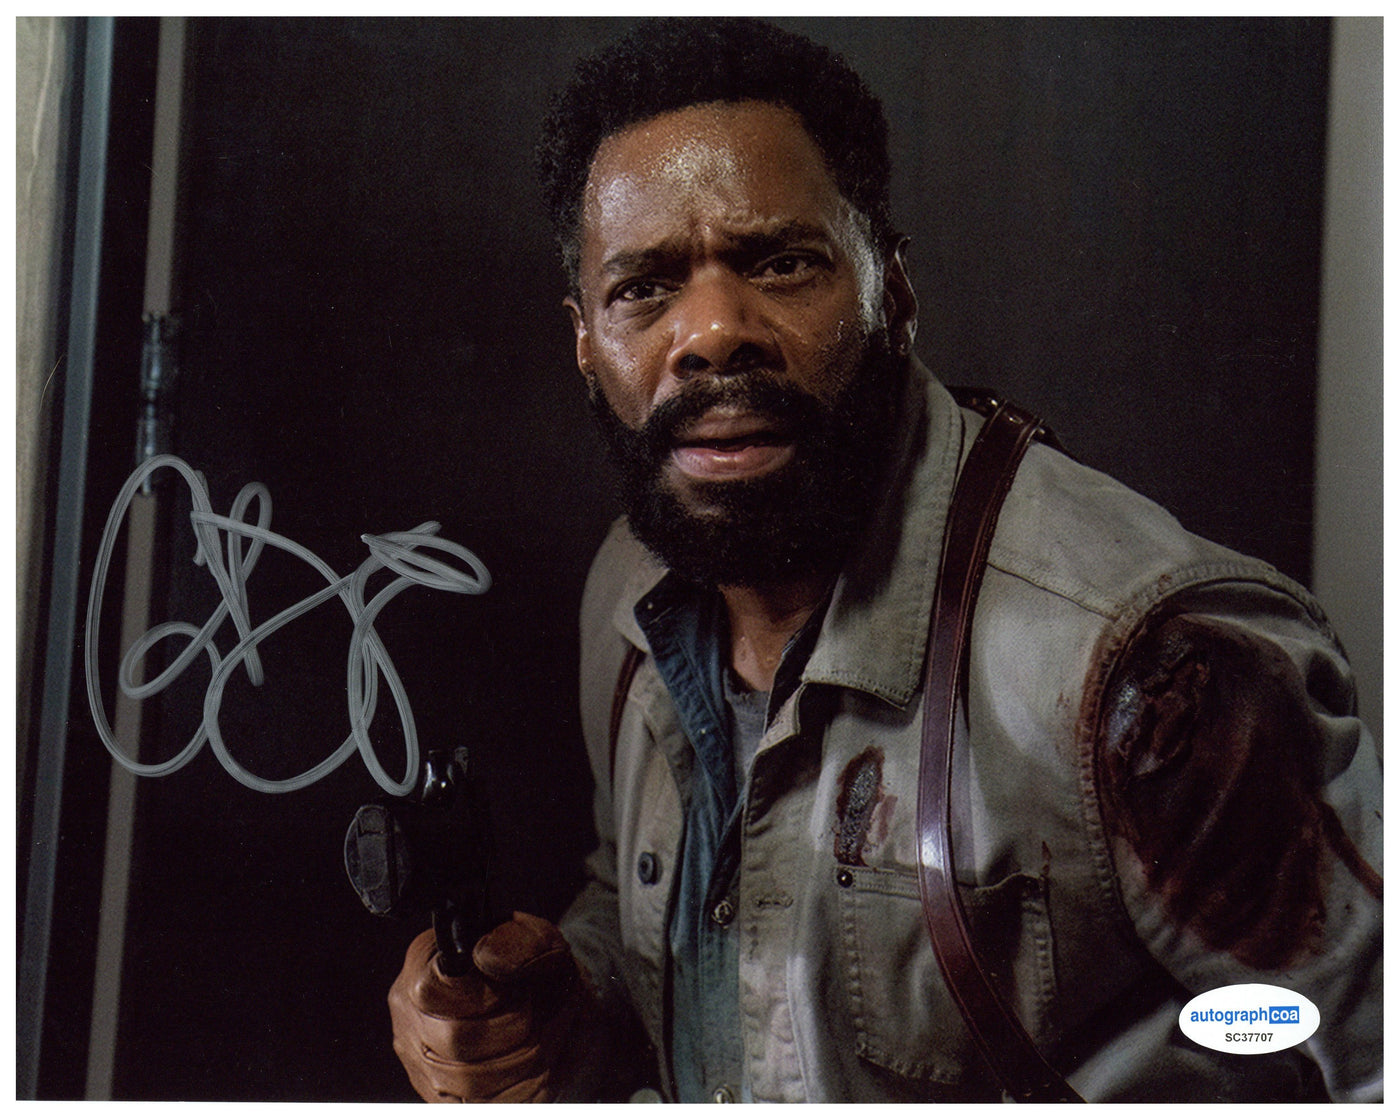 Chad Coleman Signed 8x10 Photo The Walking Dead Authentic Autographed ACOA